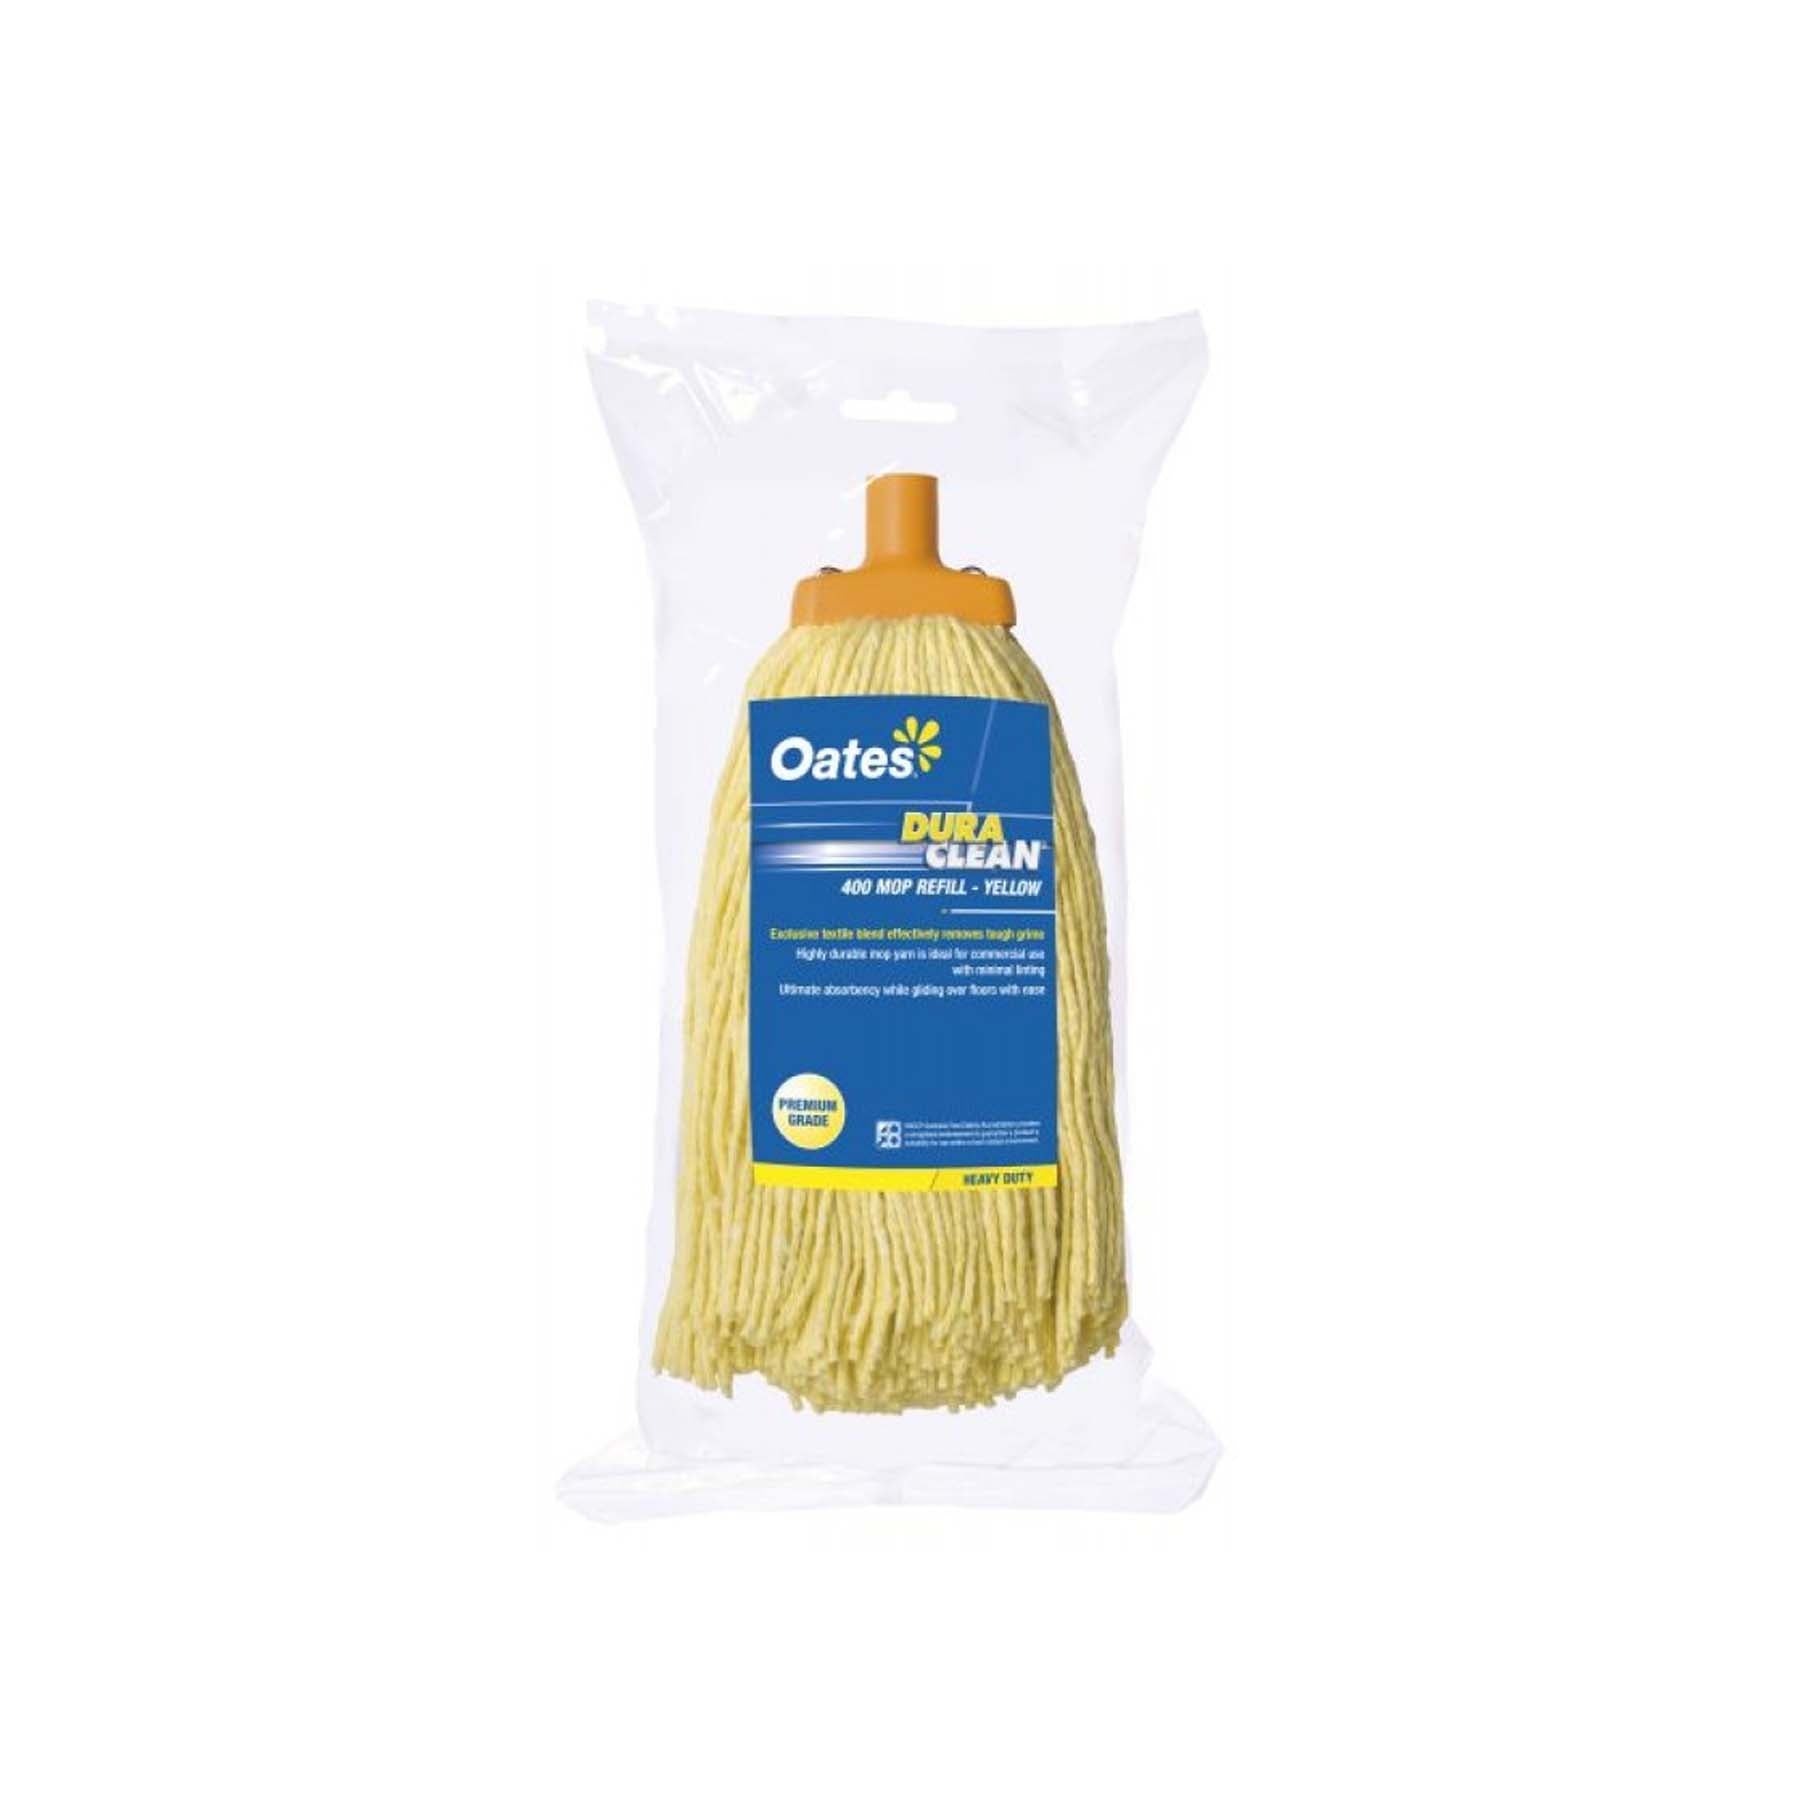 OATES DURACLEAN® 400G MOP HEAD YELLOW 165718 / MH-DC-01Y